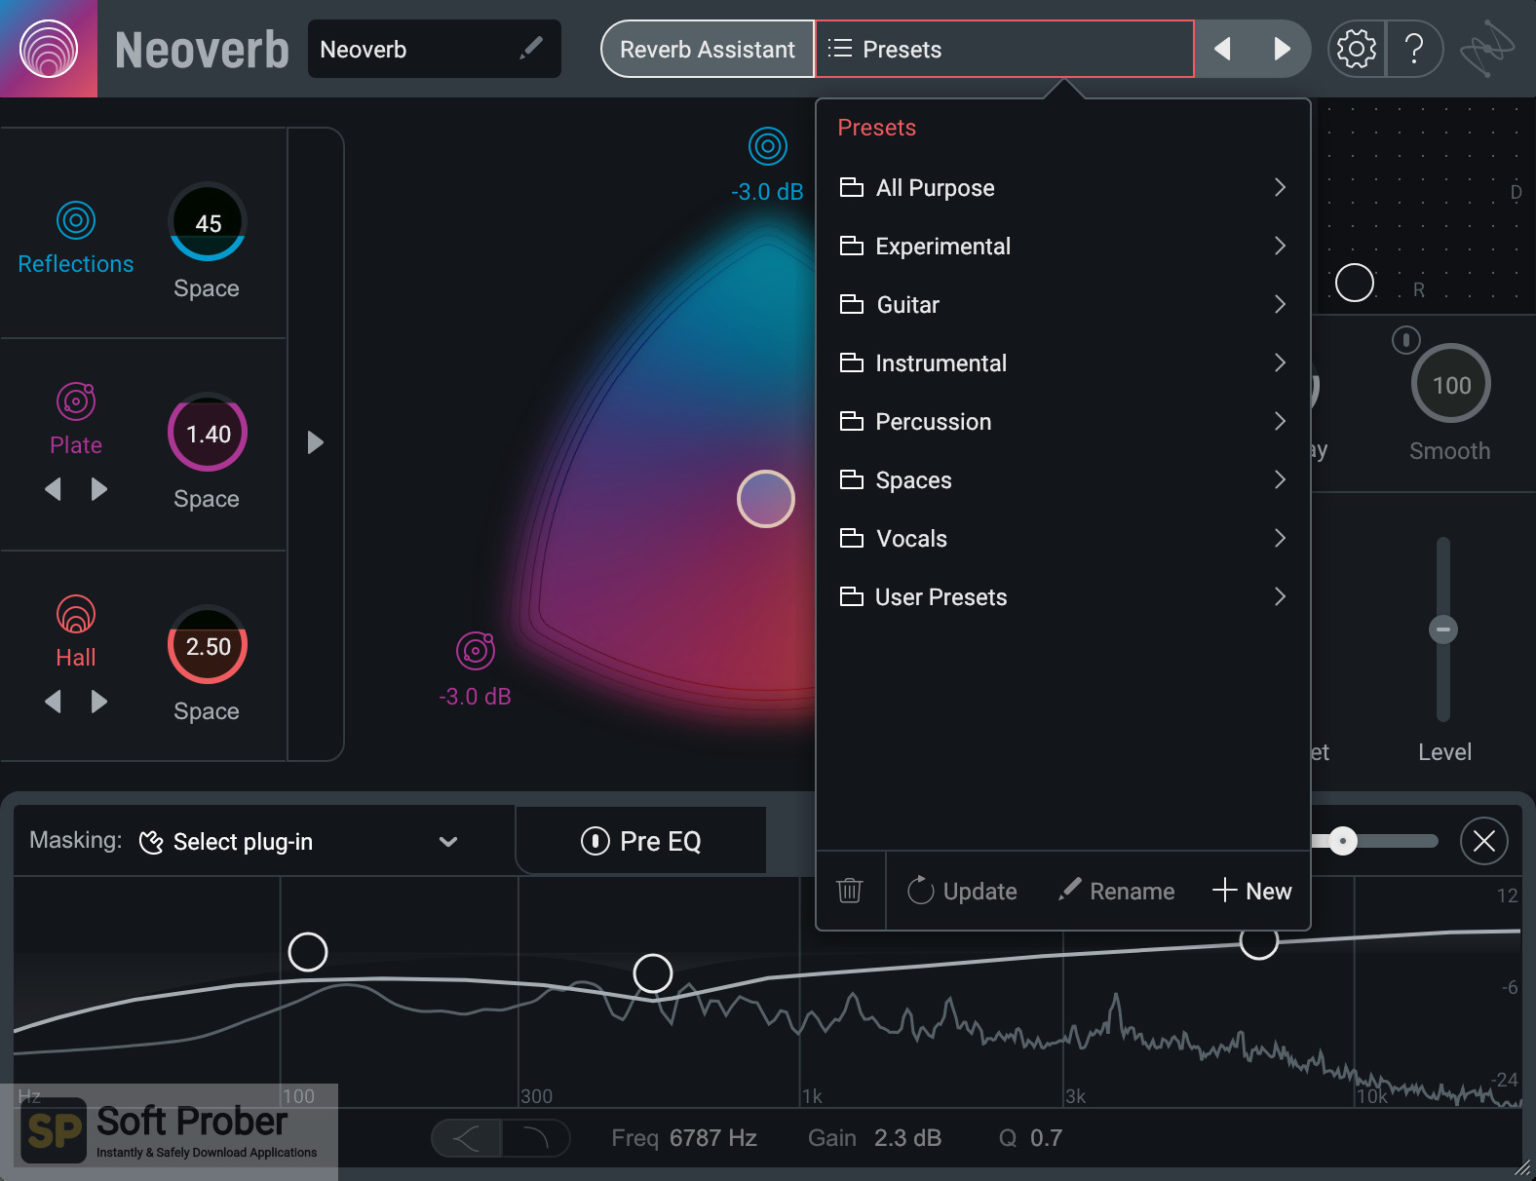 iZotope Neoverb 1.3.0 download the new